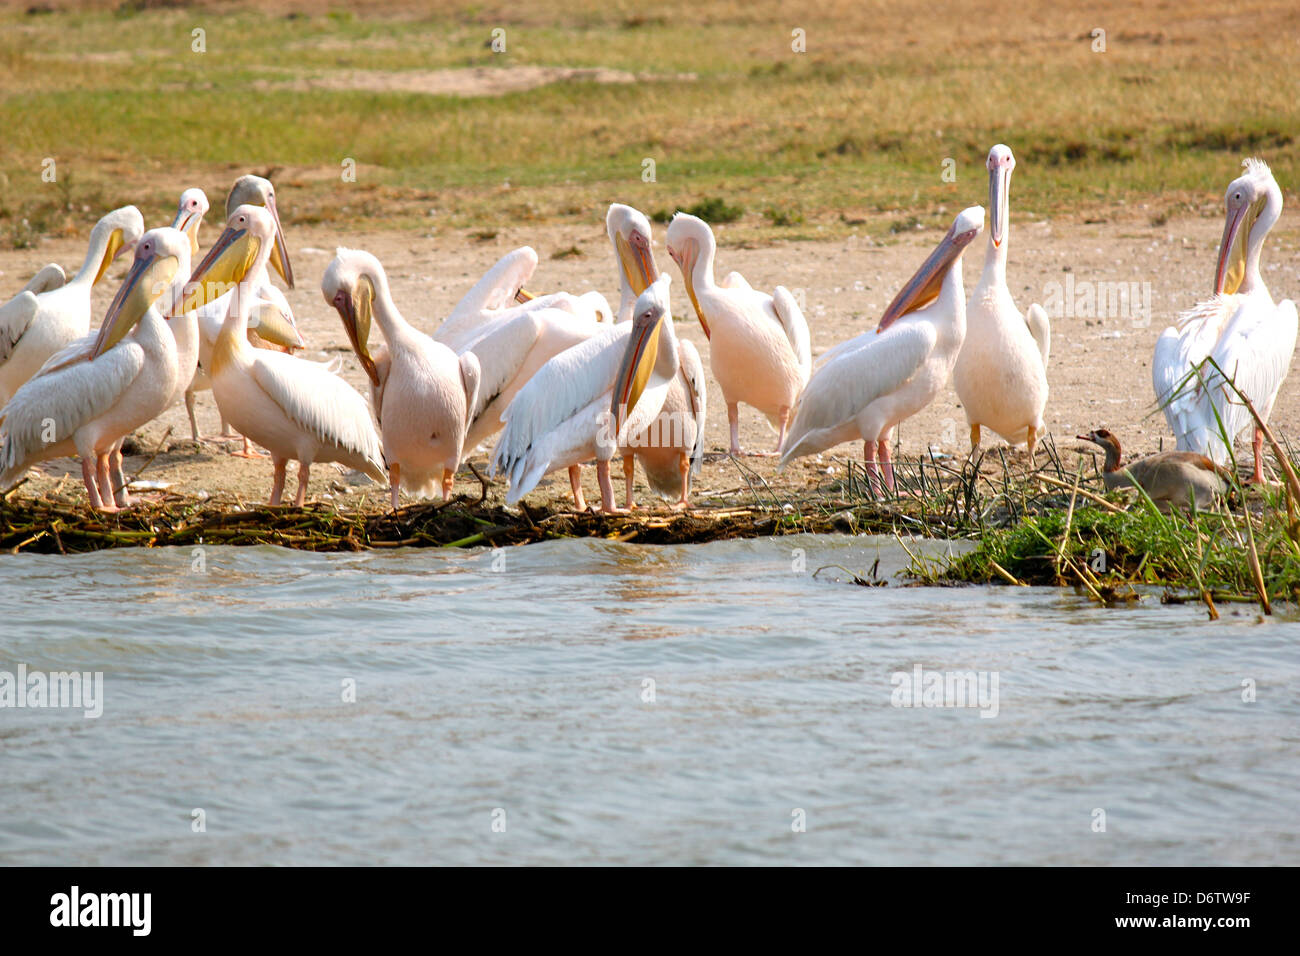 Great White Pelicans on the Nile River Stock Photo